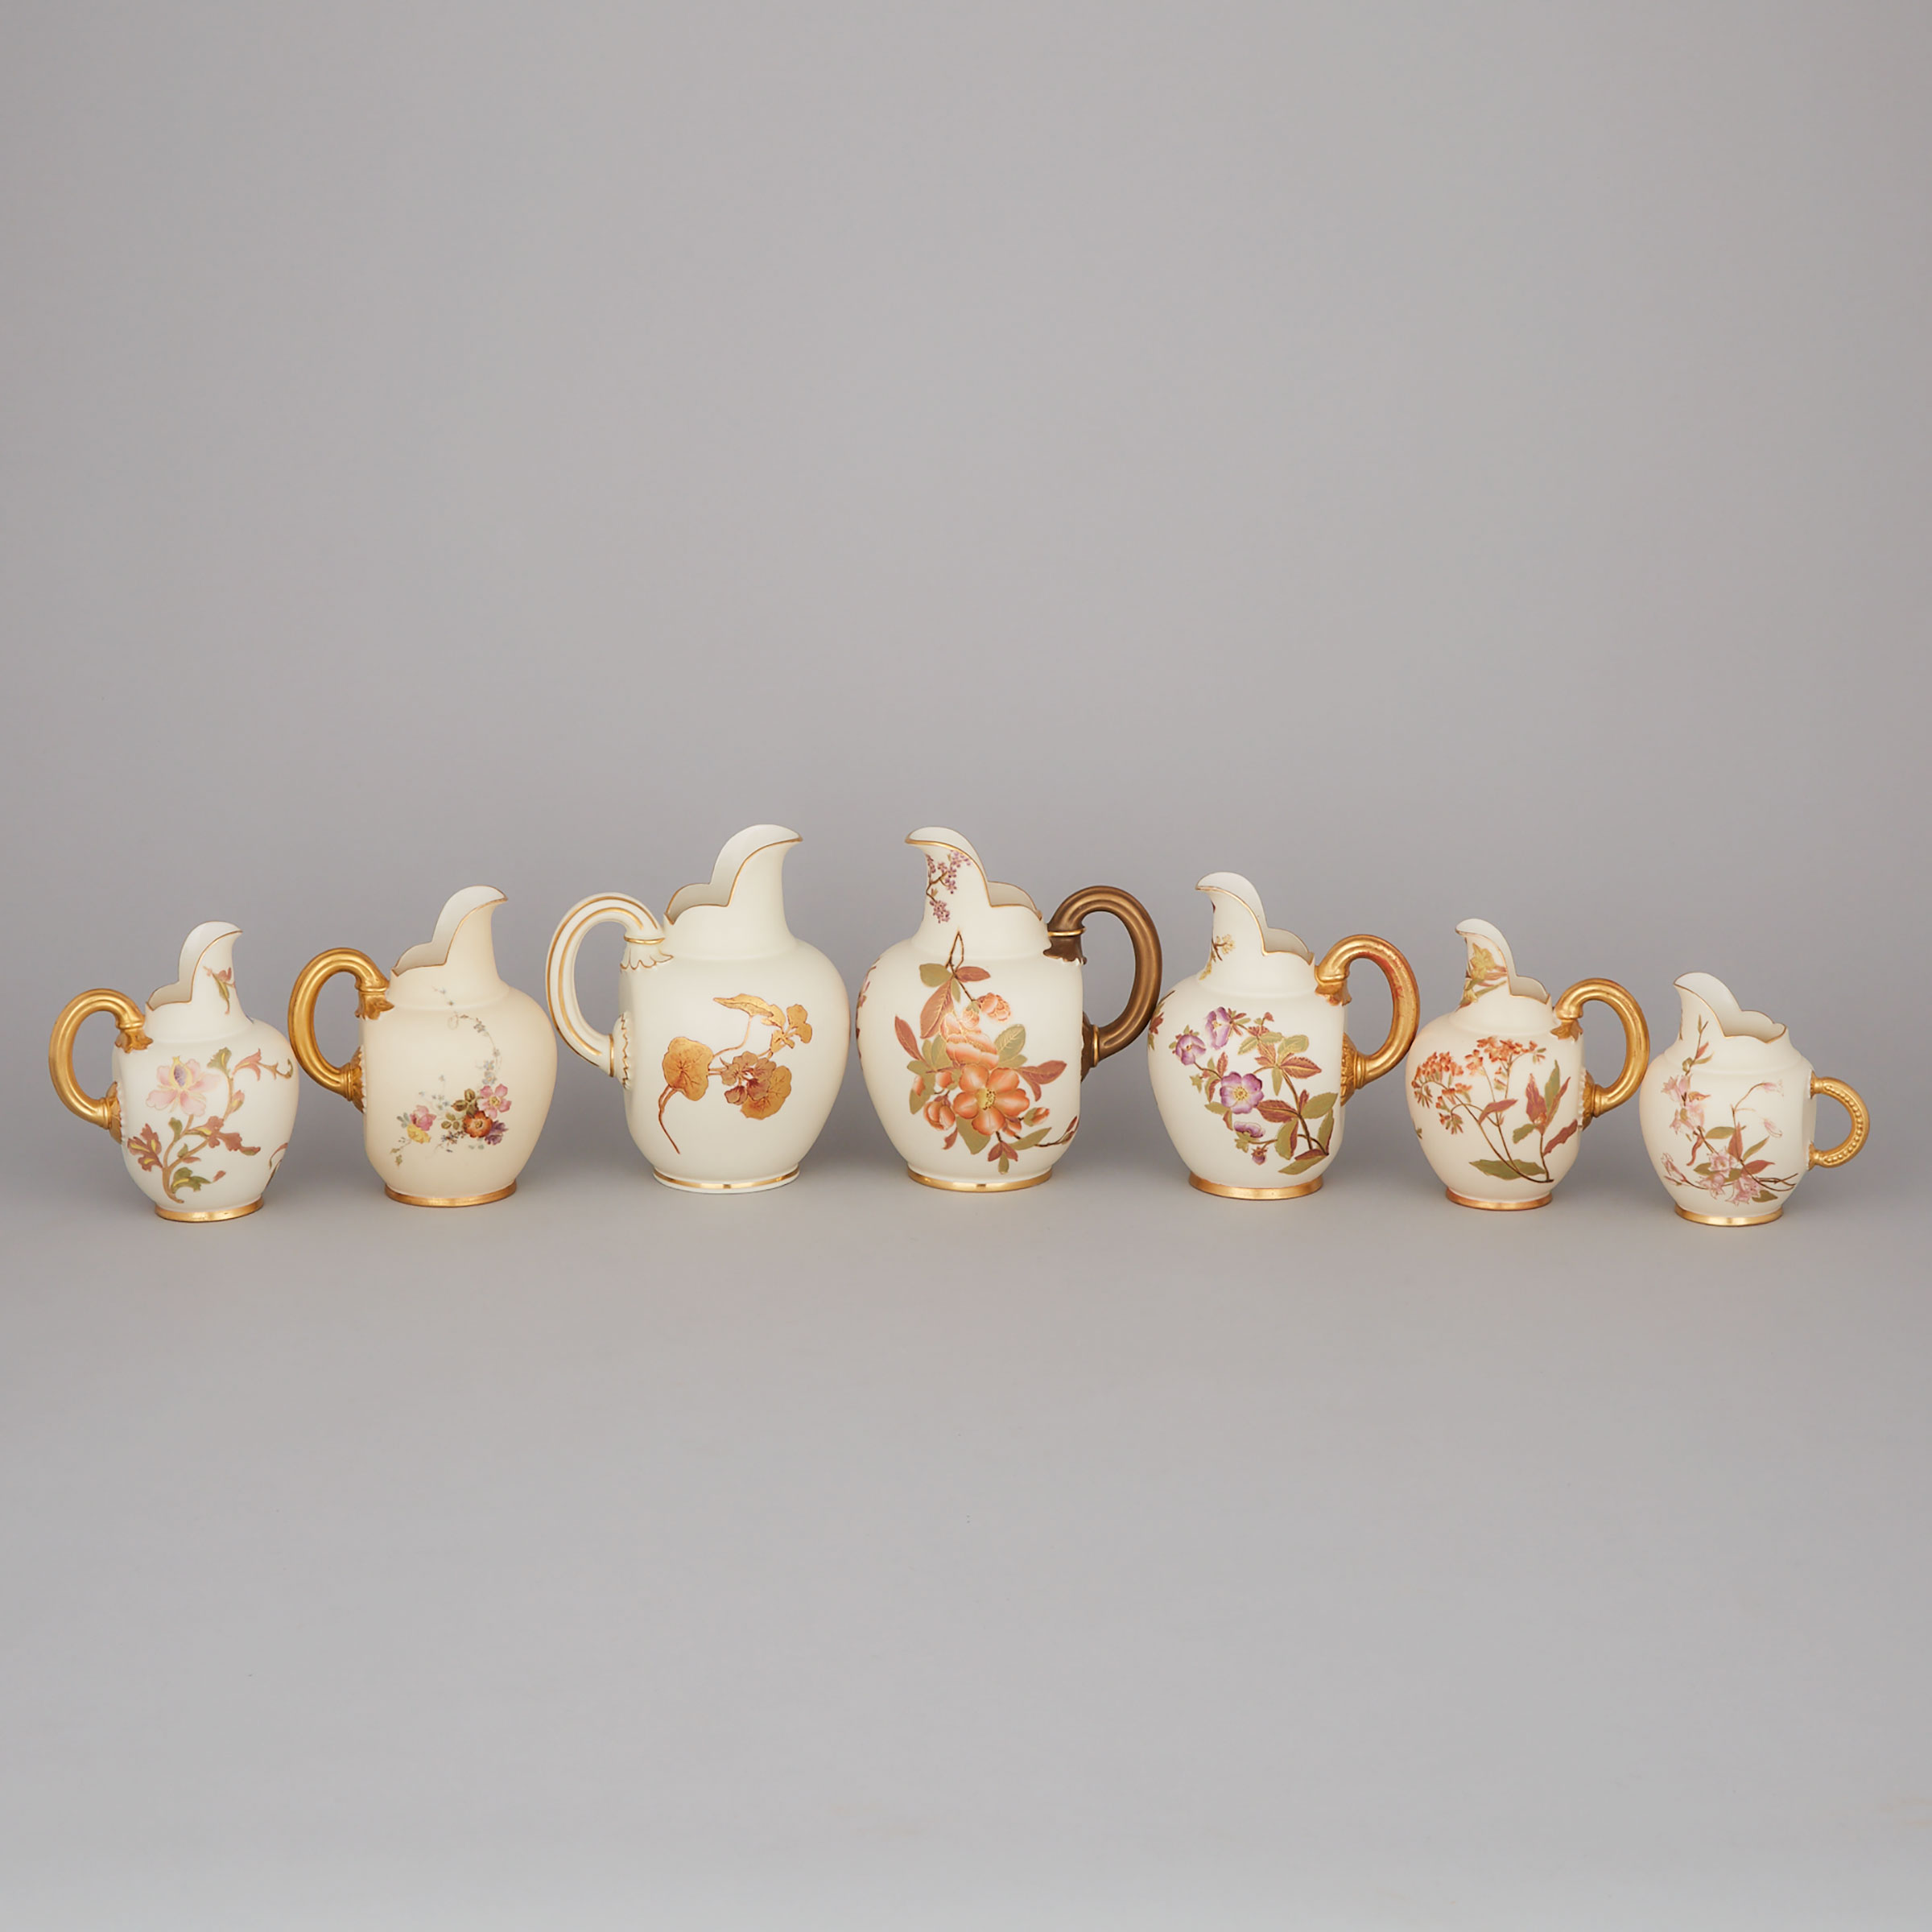 Seven Royal Worcester Blush Ivory Ground Flat Back Jugs, late 19th century